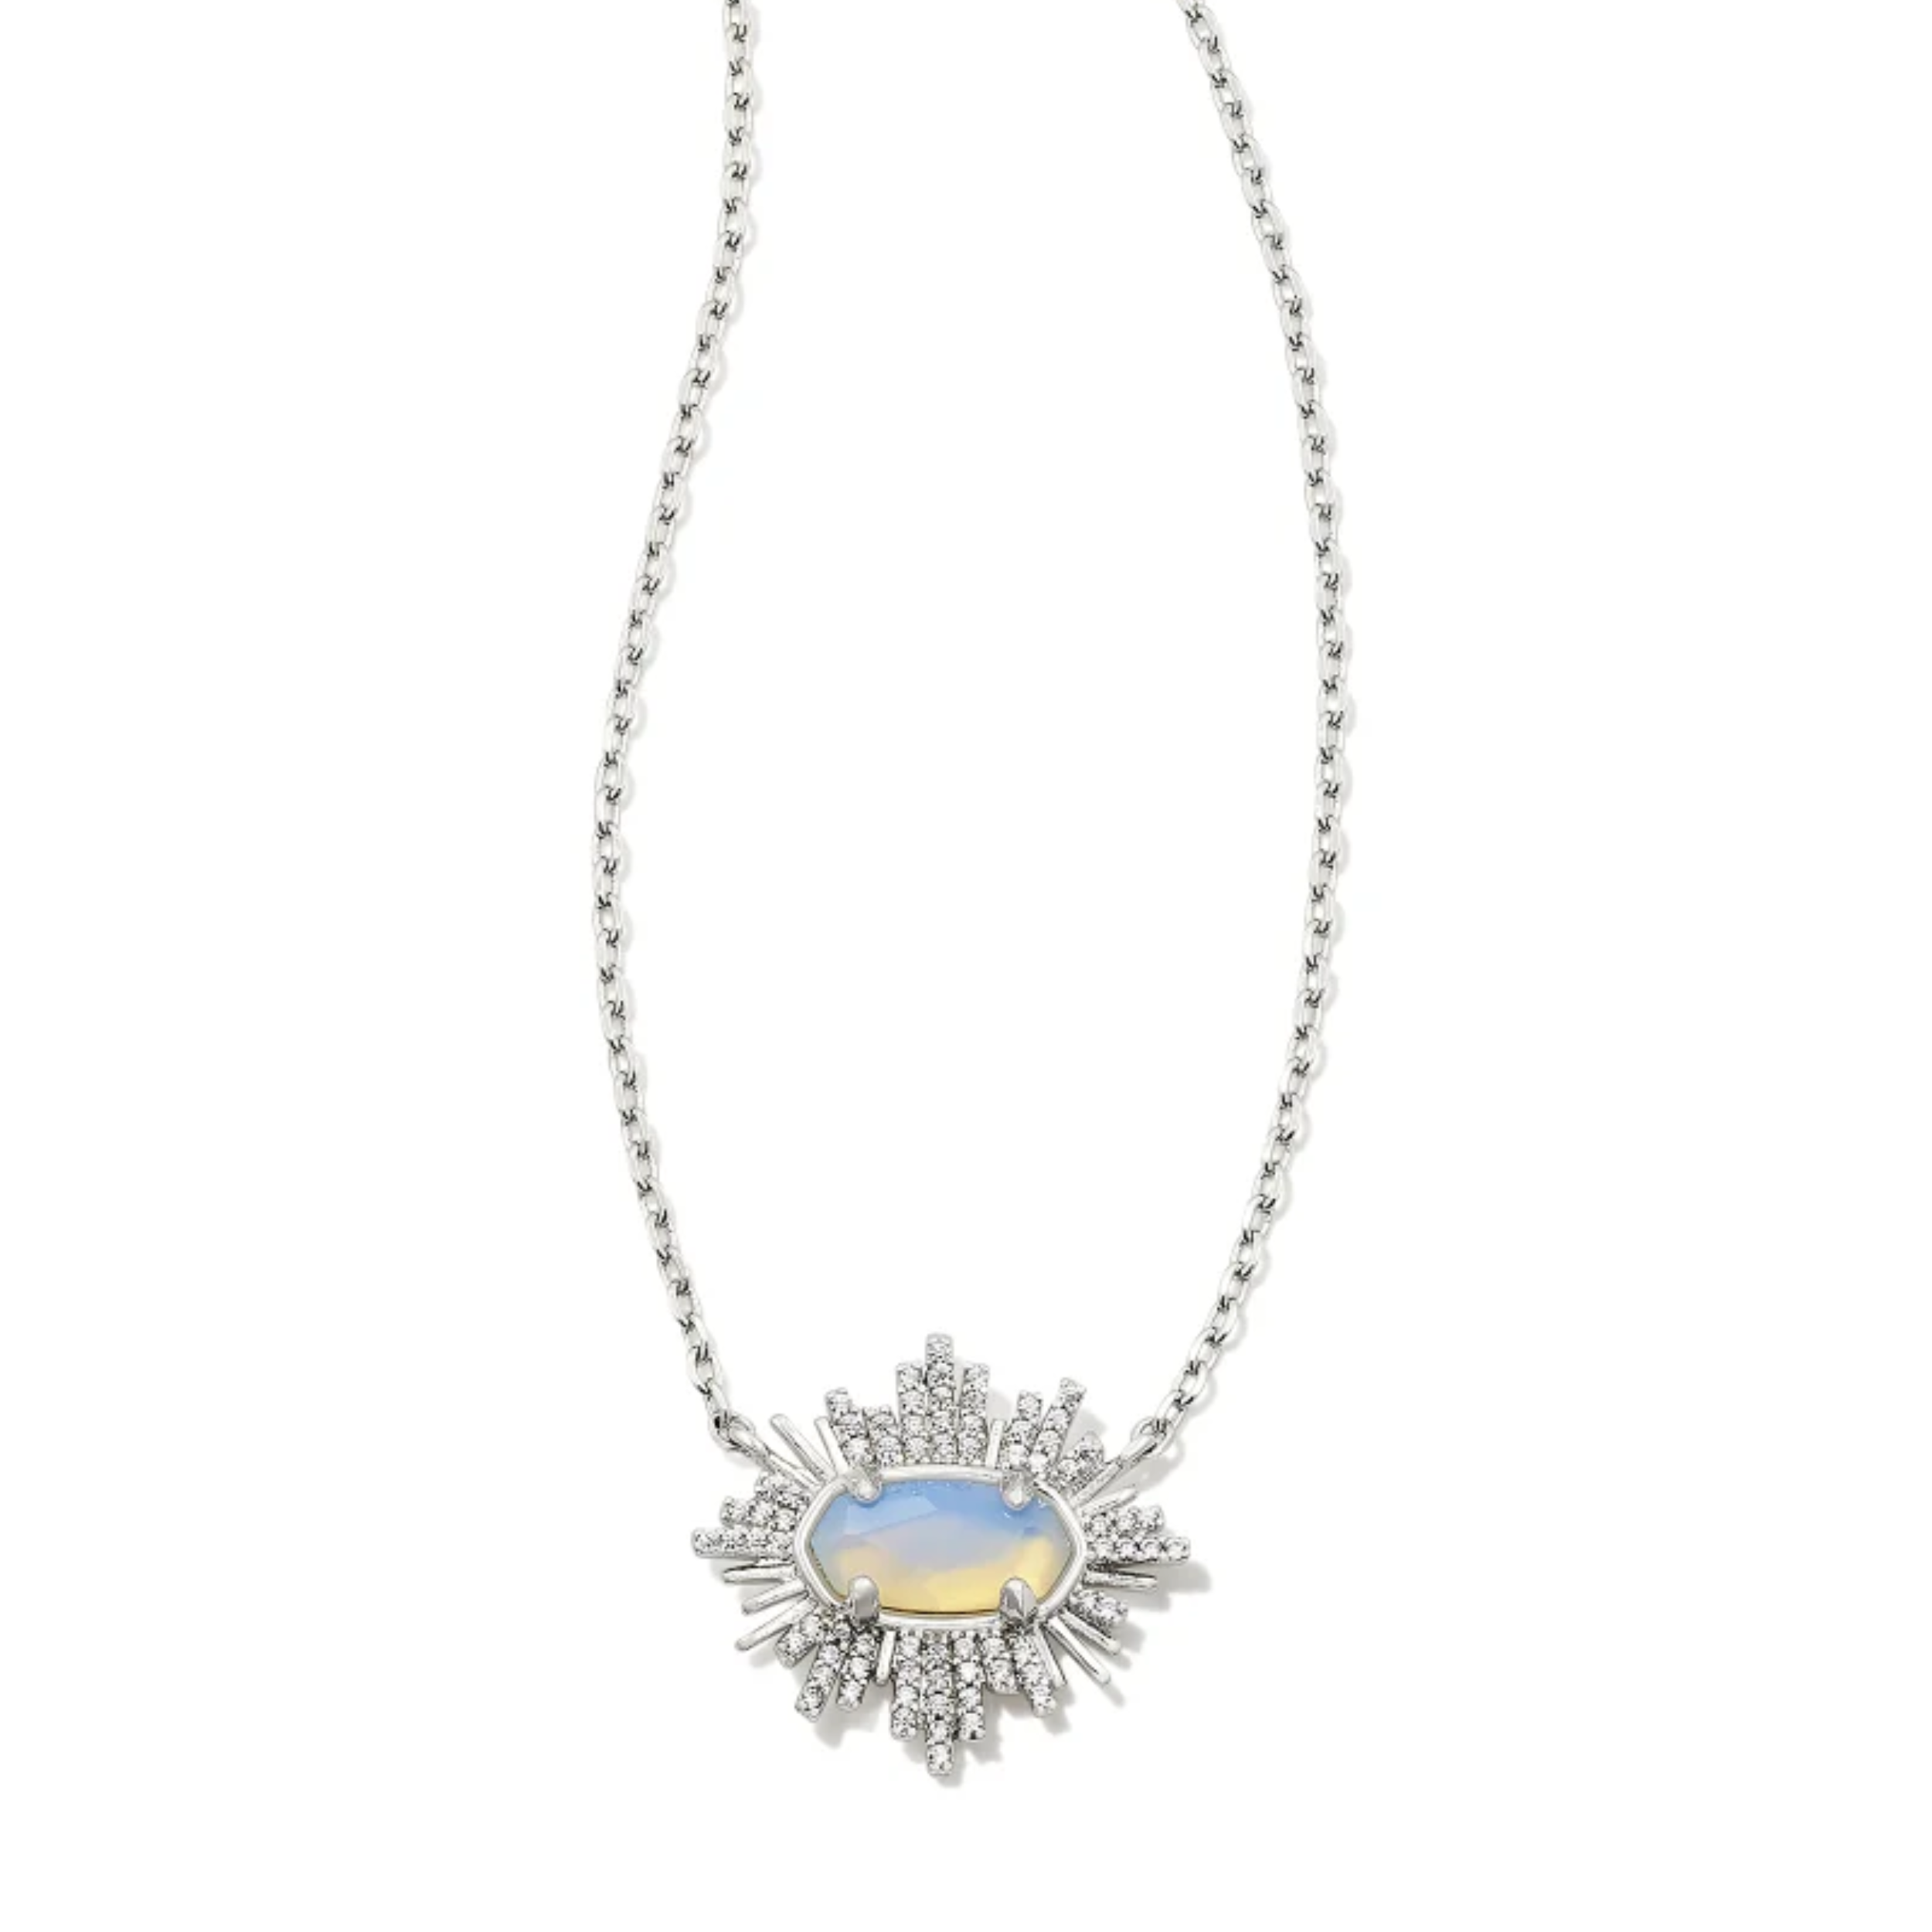 This Grayson Sunburst Silver Frame Pendant Necklace in Iridescent Opalite Illusion by Kendra Scott is pictured on a white background.